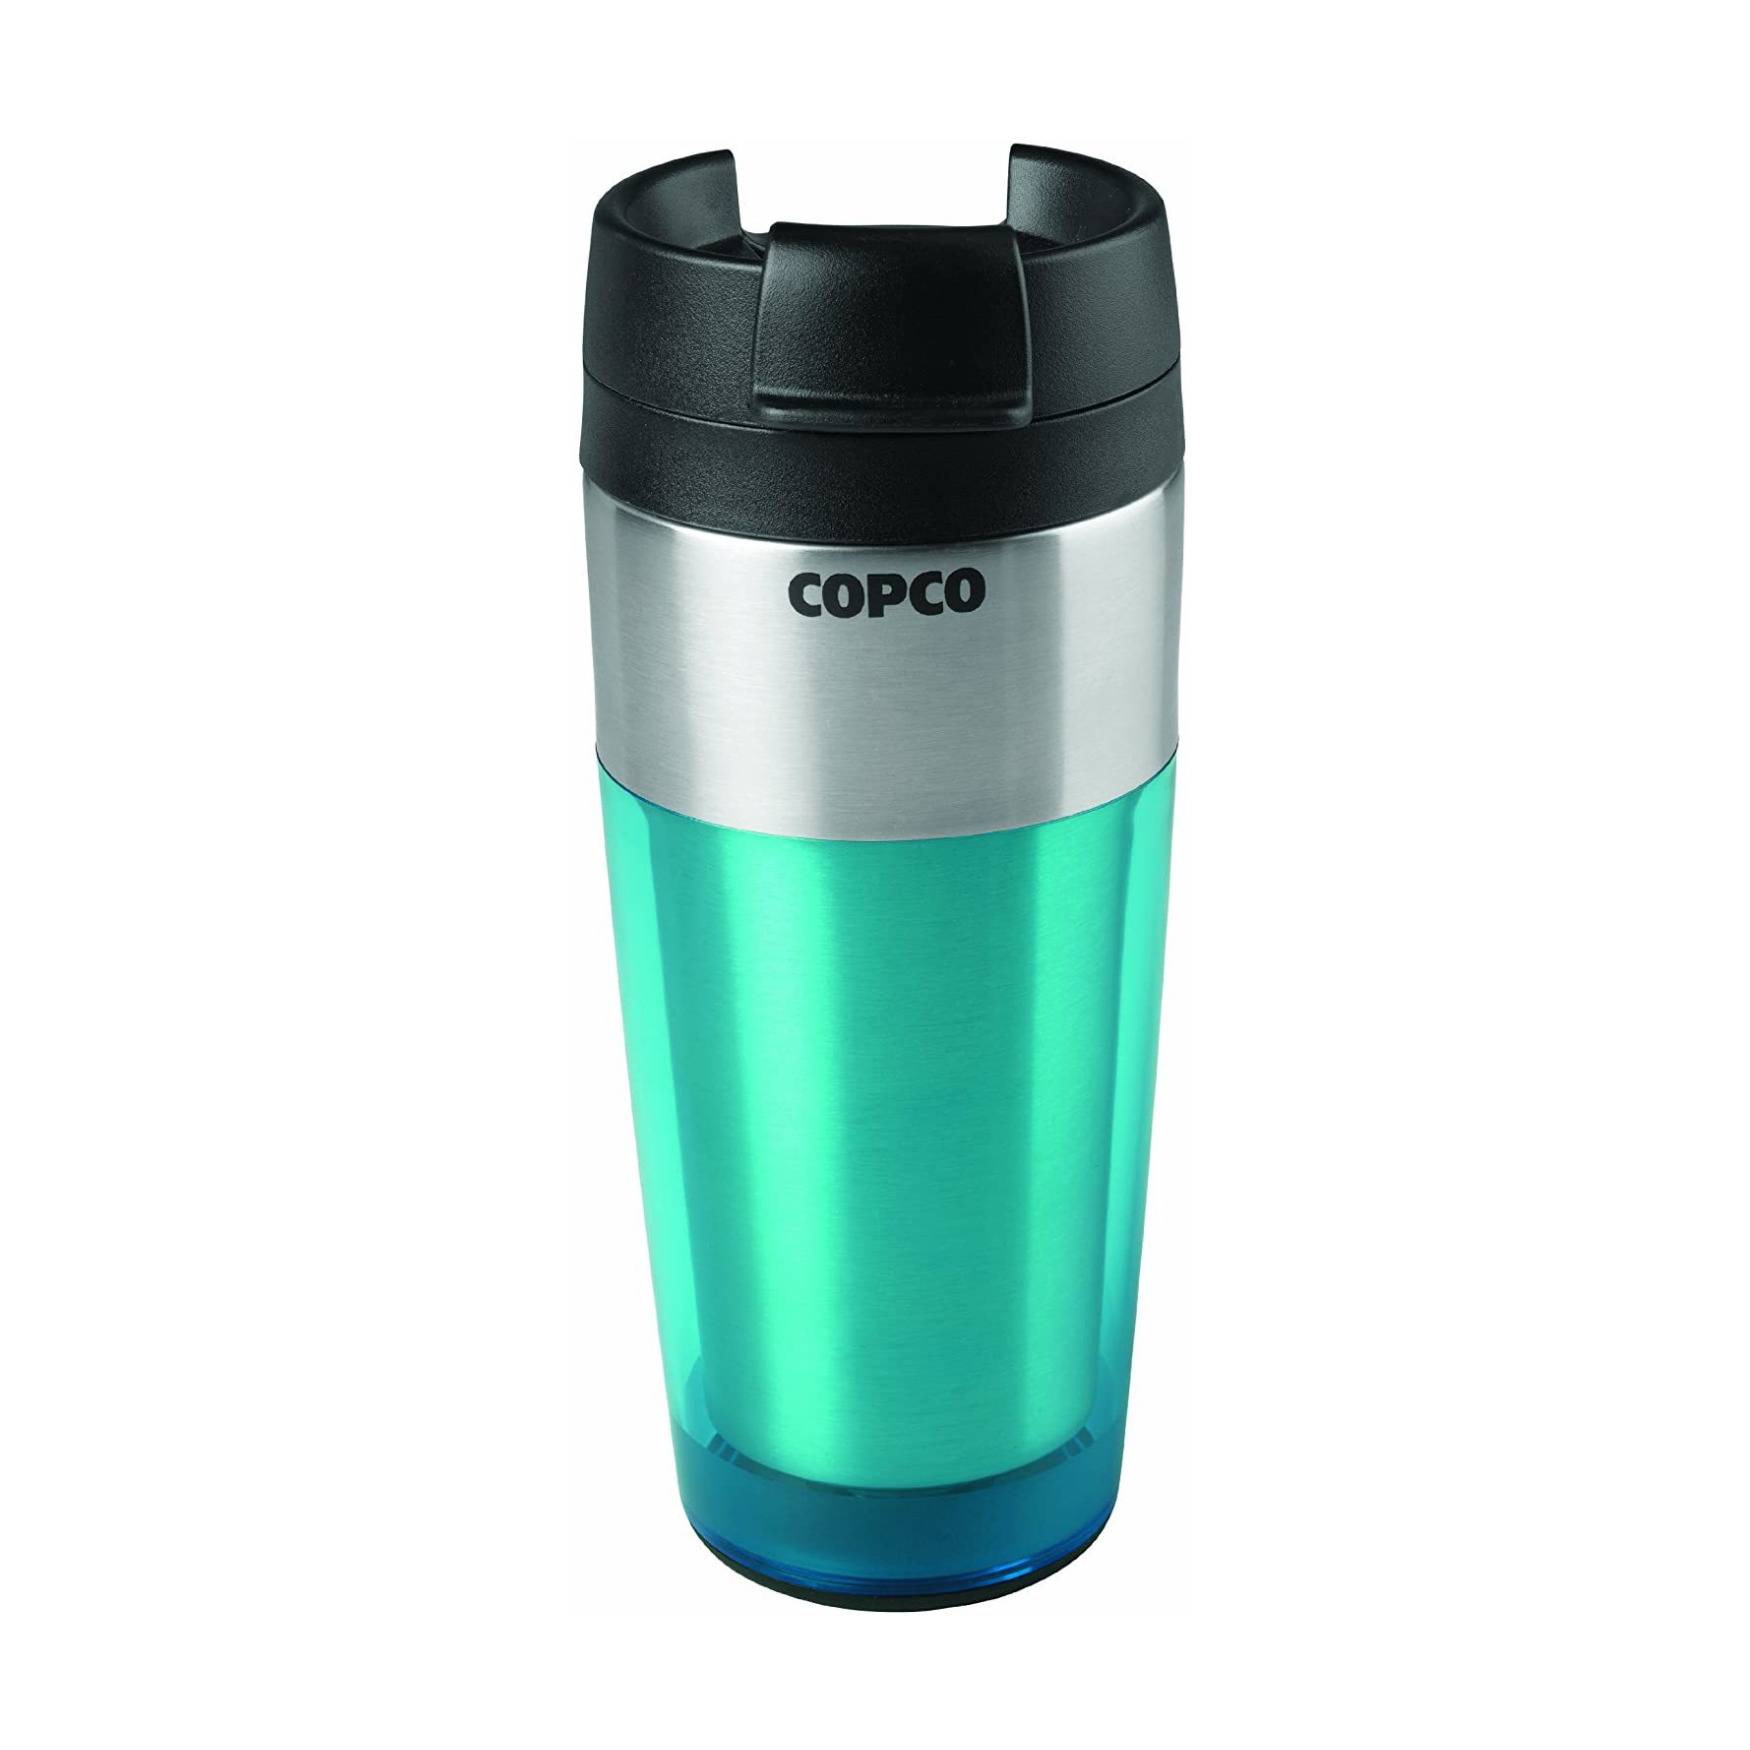 Copco Firefly 16-Ounce Double Wall Stainless Steel Tumbler with Flip Top Lid (Teal)